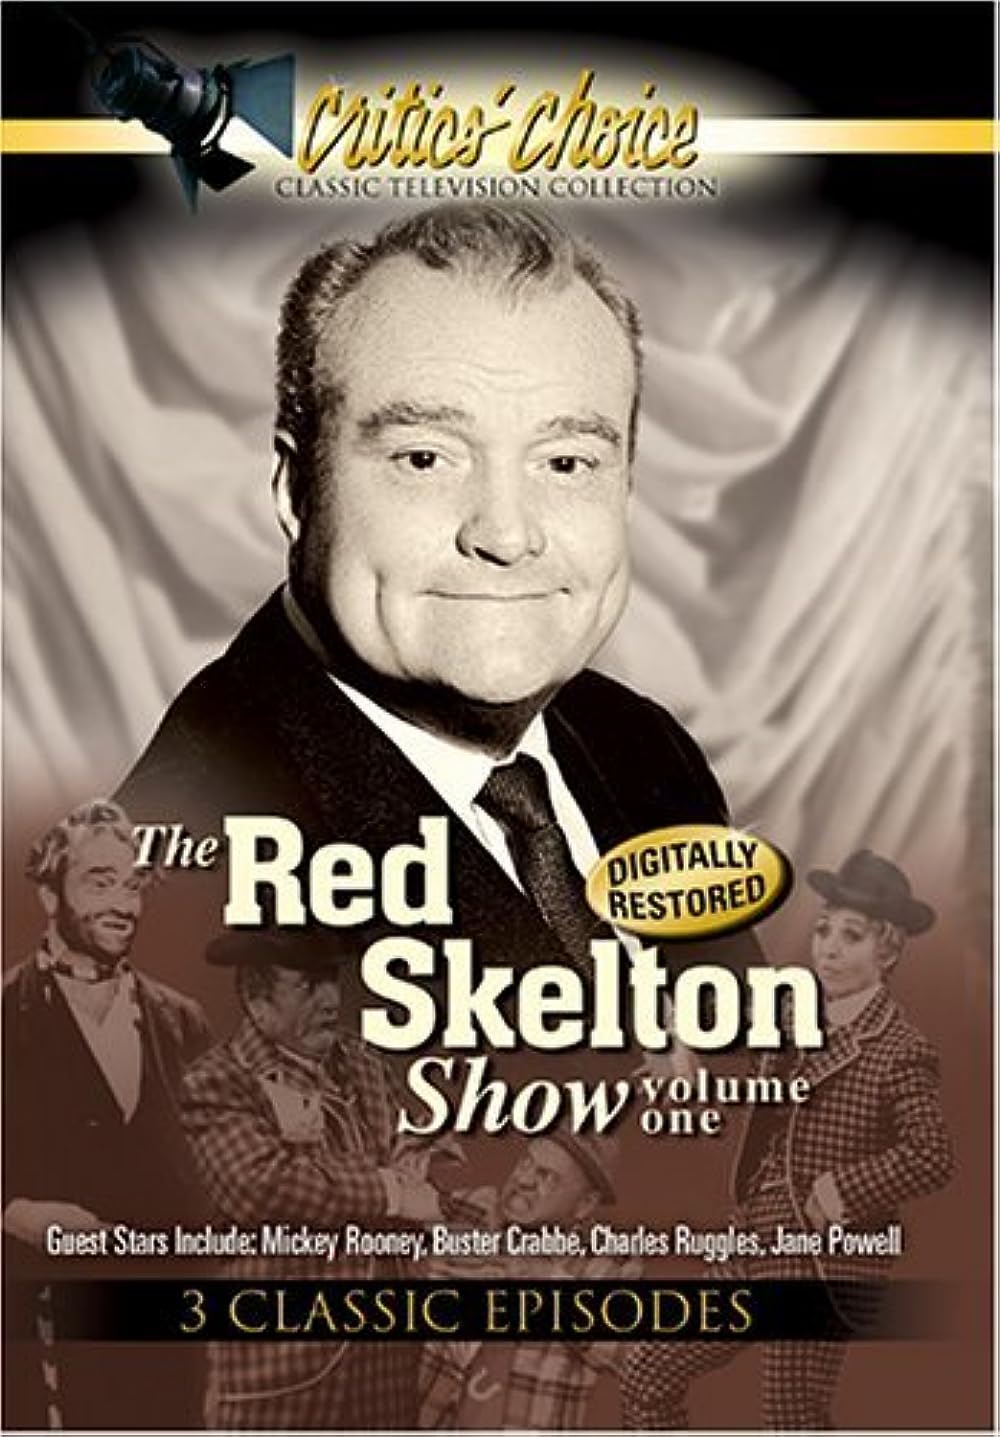 The Red Skelton Hour